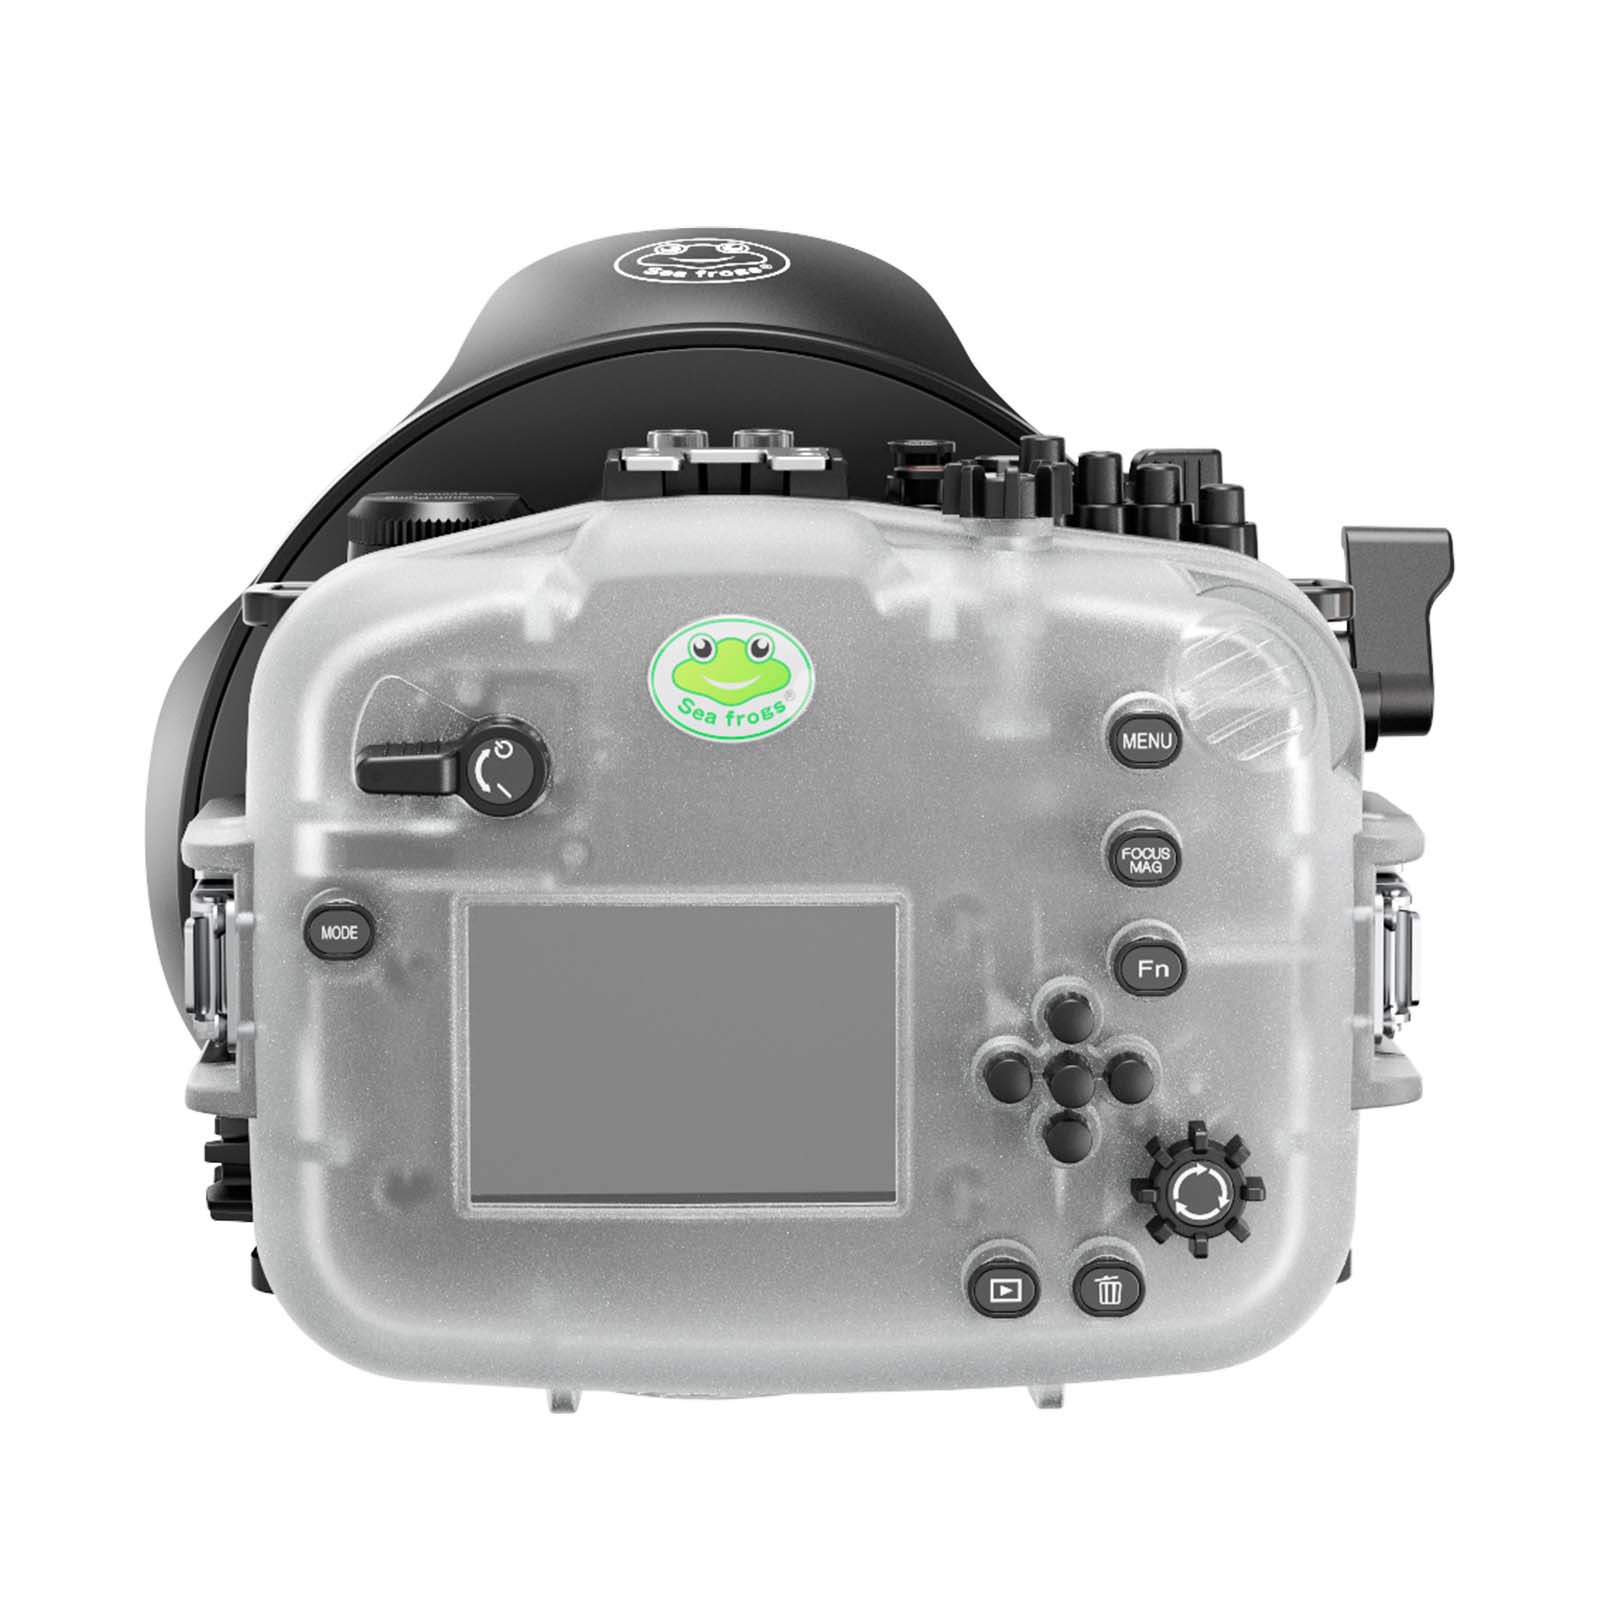 Sea Frogs 40M/130FT Diving Camera Case For Sony FX3 With Dome Port (WA005-B)